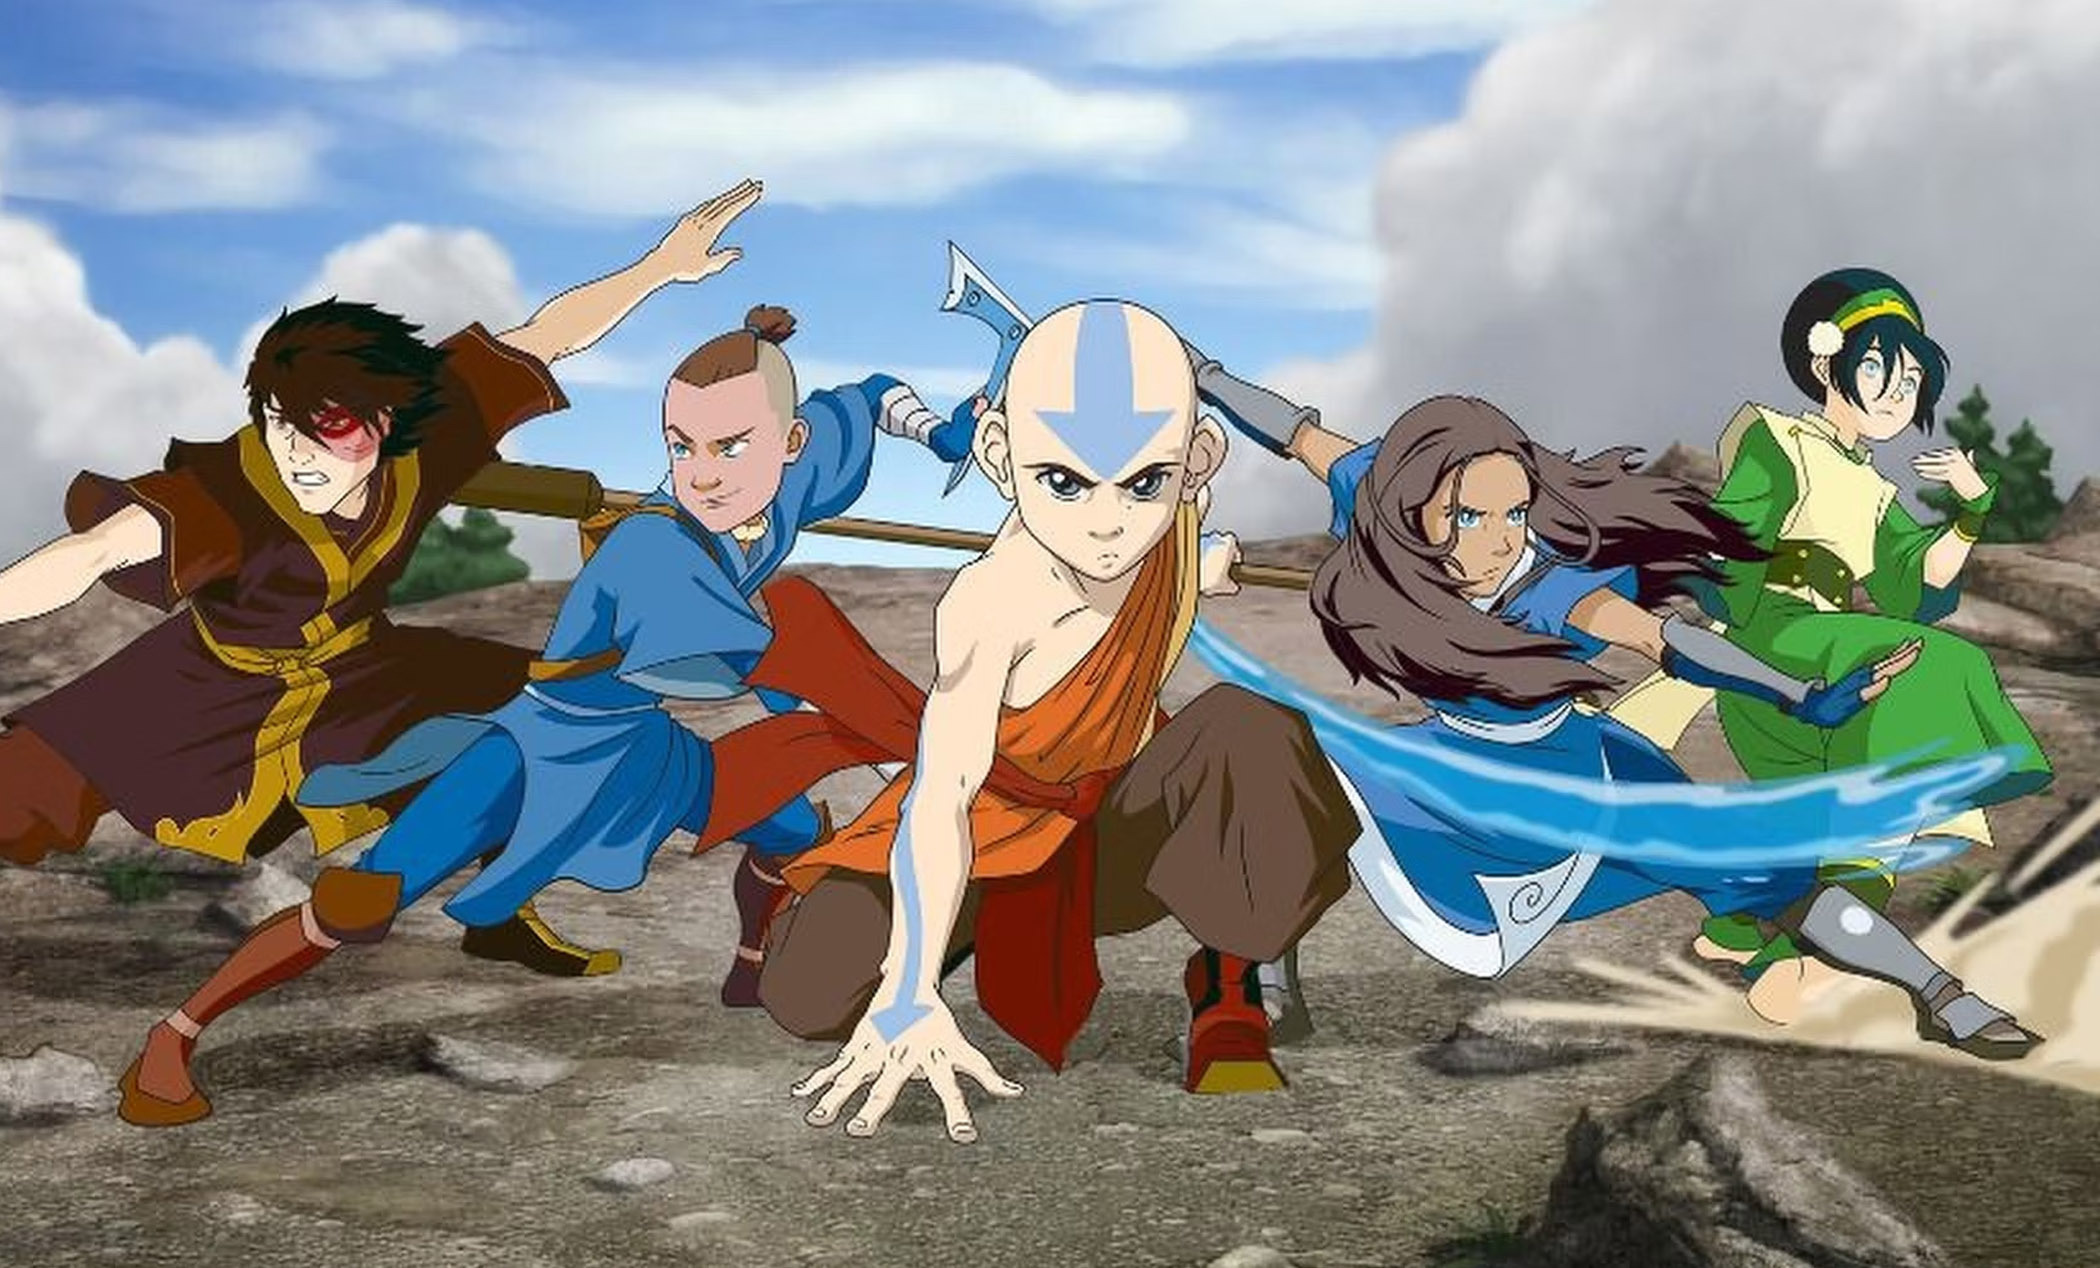 What Type of Bender Are You An Avatar The Last Airbender Quiz  Red Wolf  Press